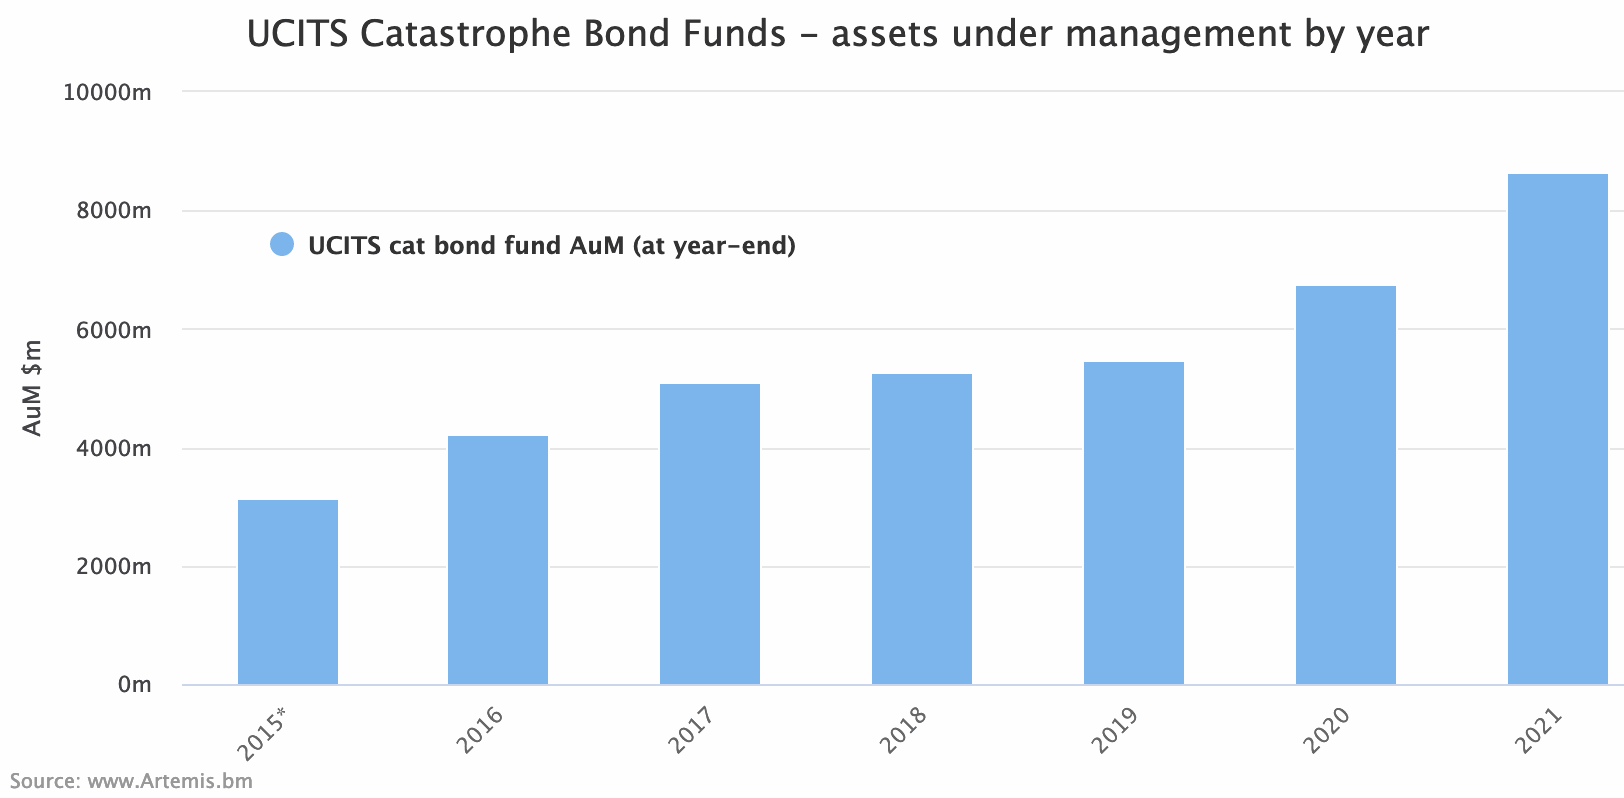 UCITS catastrophe bond fund assets under management by year